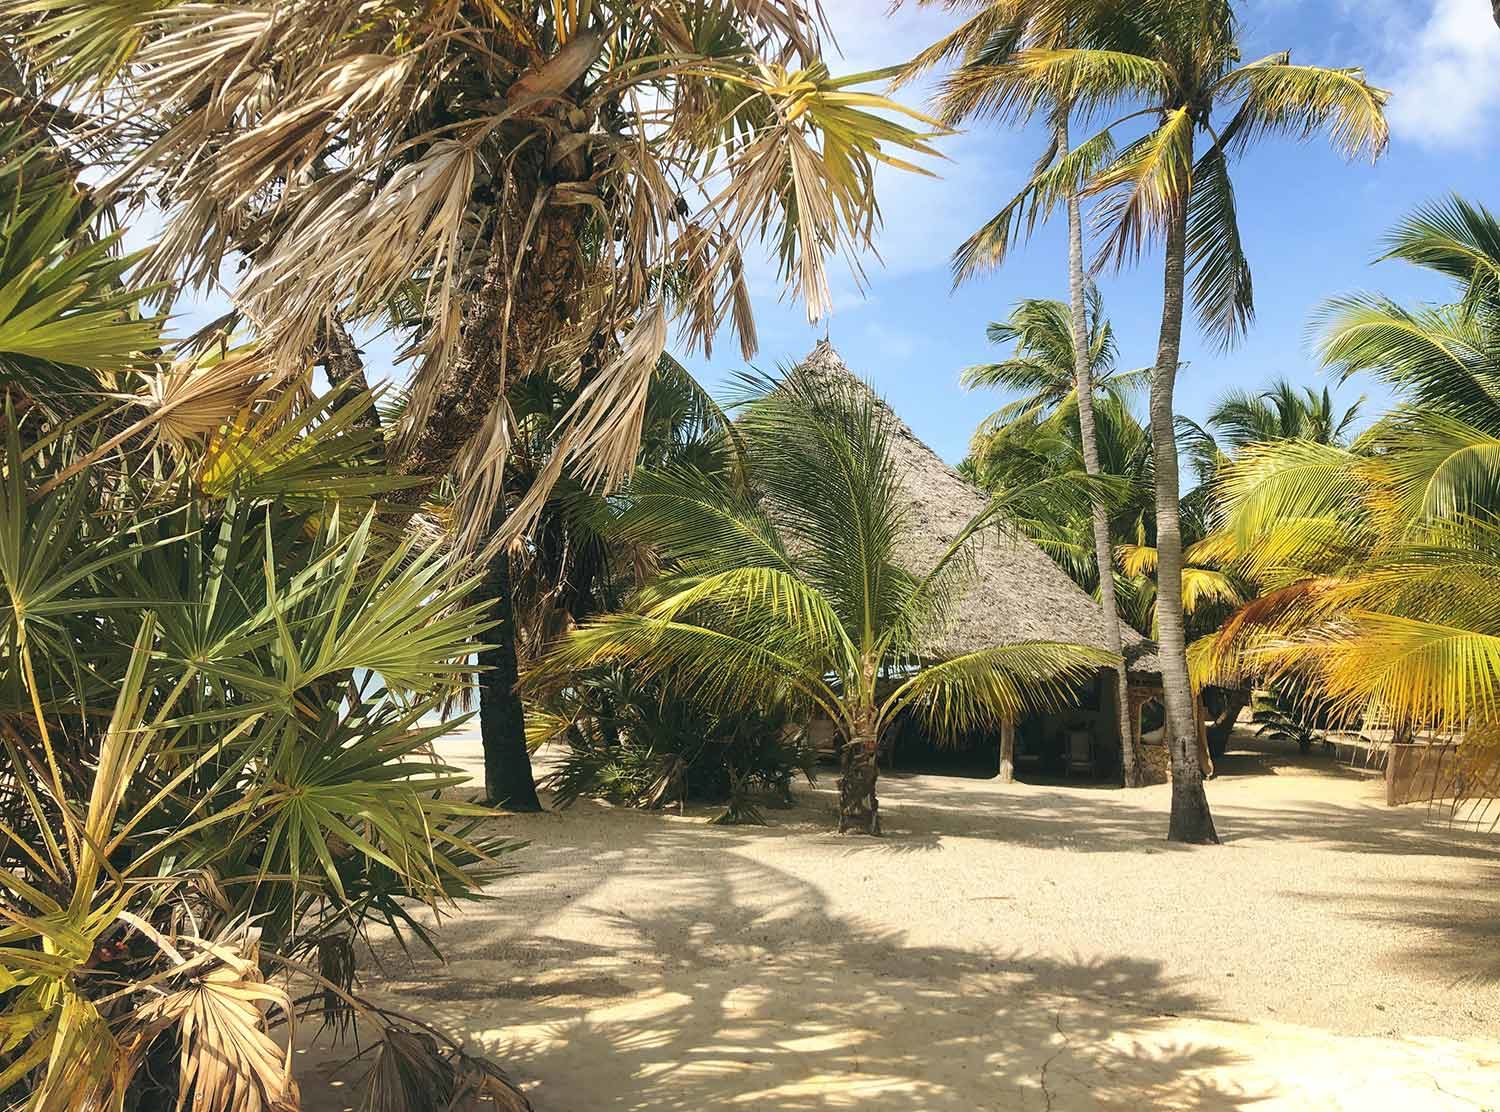 Manda Bay Resort It's the perfect setting with the palmtrees and white sandy beaches